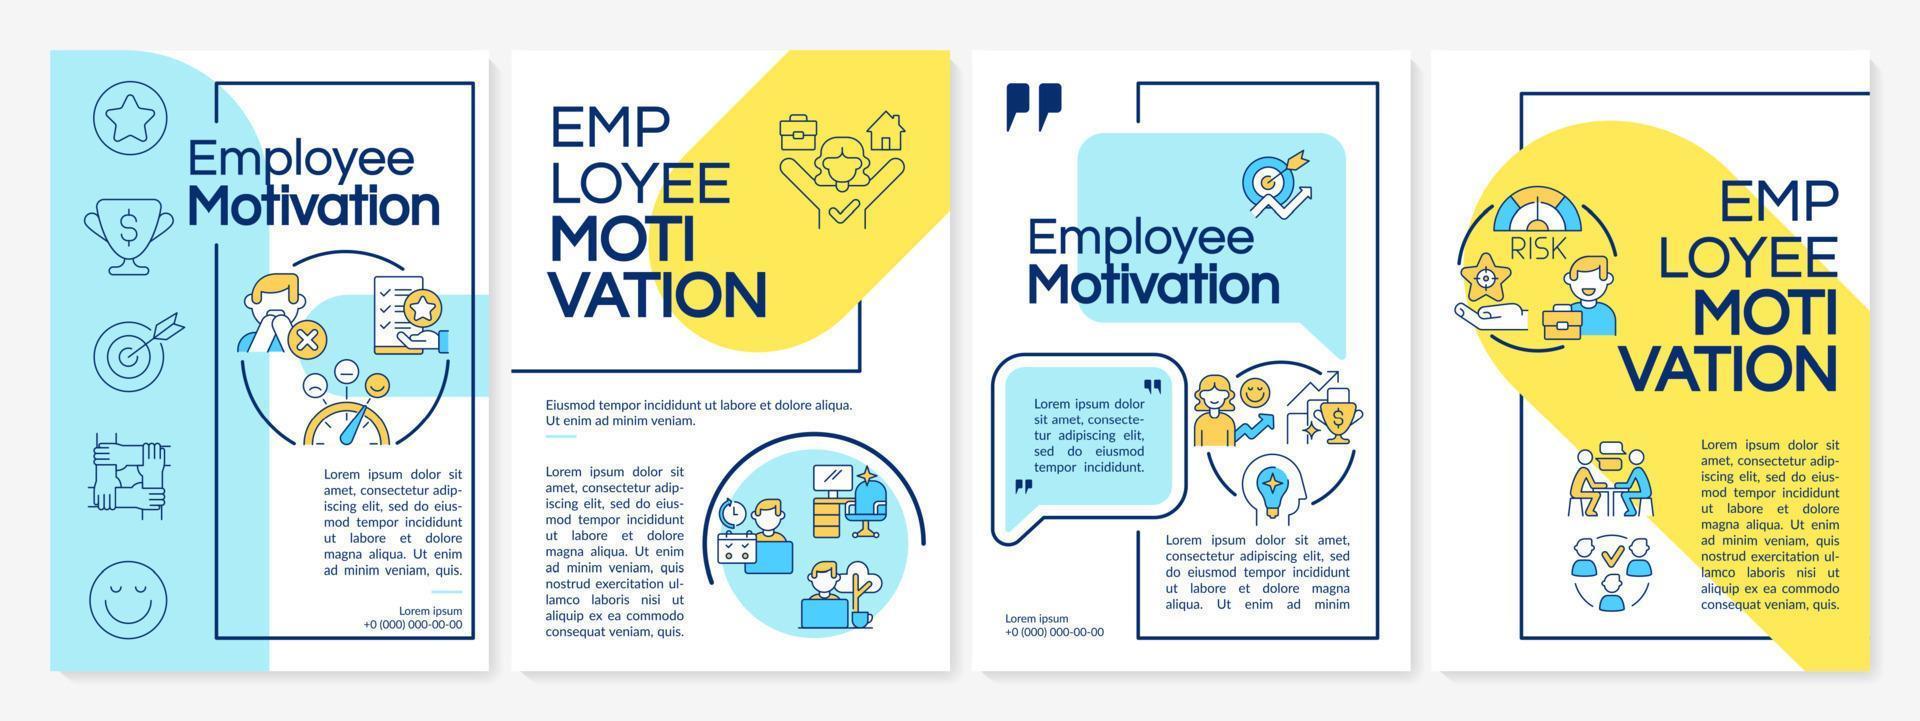 Employee engagement blue and yellow brochure template. Cash incentives. Leaflet design with linear icons. 4 vector layouts for presentation, annual reports.